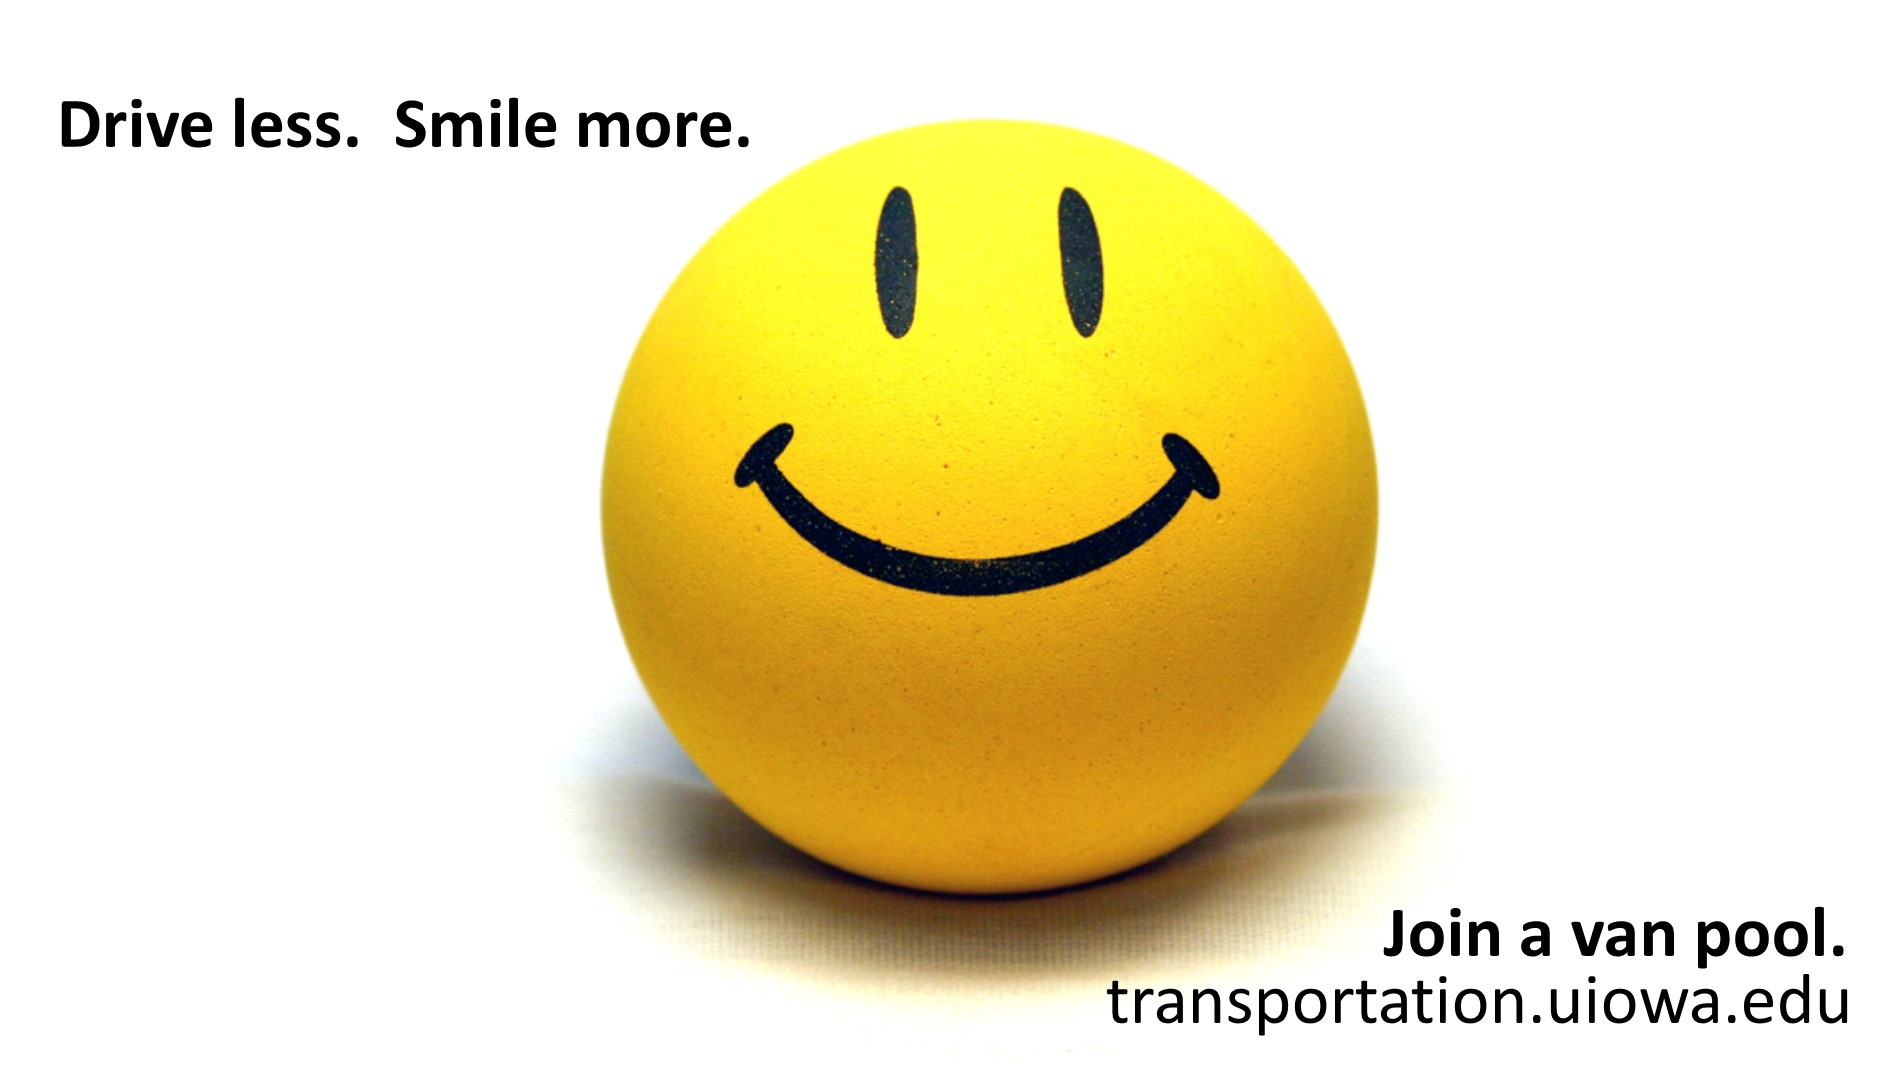 Drive less and smile more by vanpooling